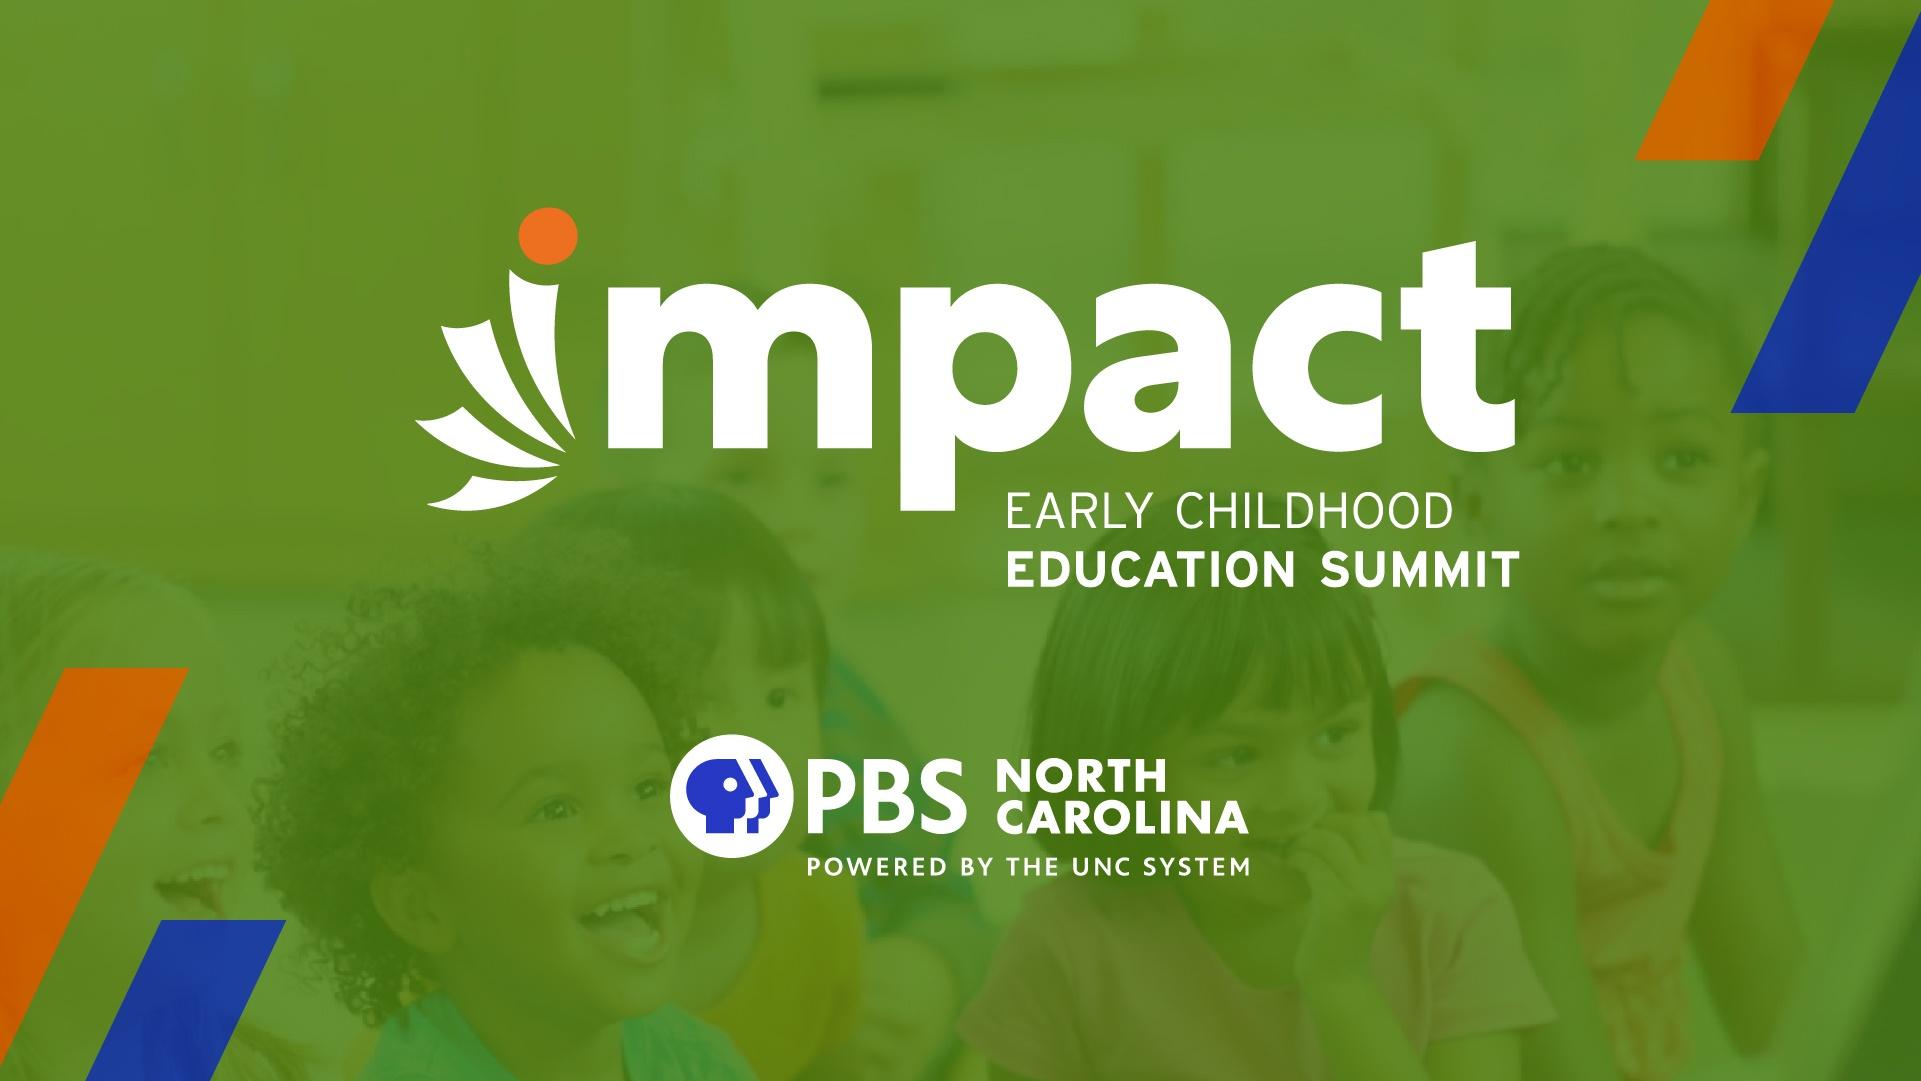 Impact Early Childhood Education Summit logo on green background with PBS North Carolina logo in white font